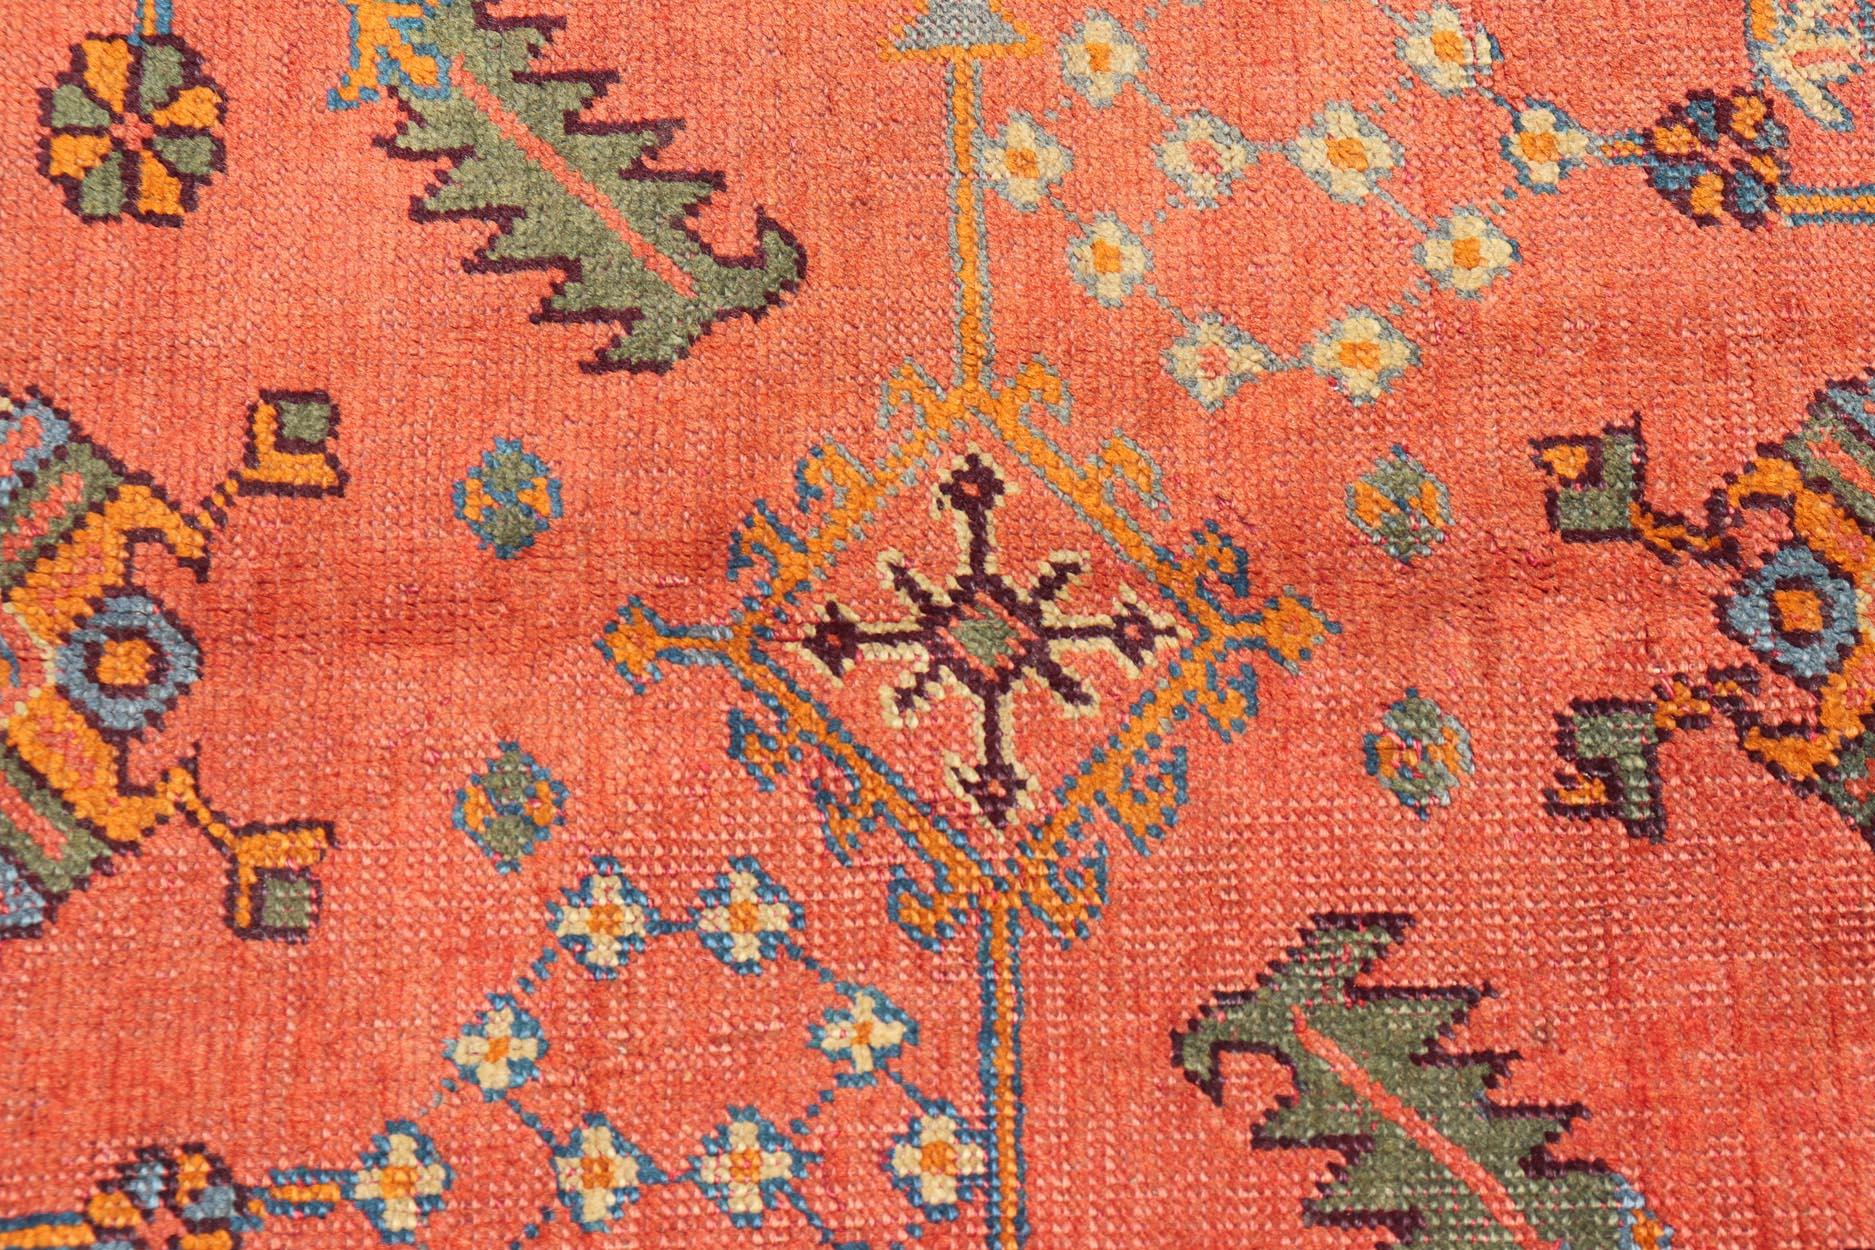 20th Century Antique Turkish Oushak Colorful Rug With All-Over Design In Salmon and Blue's  For Sale